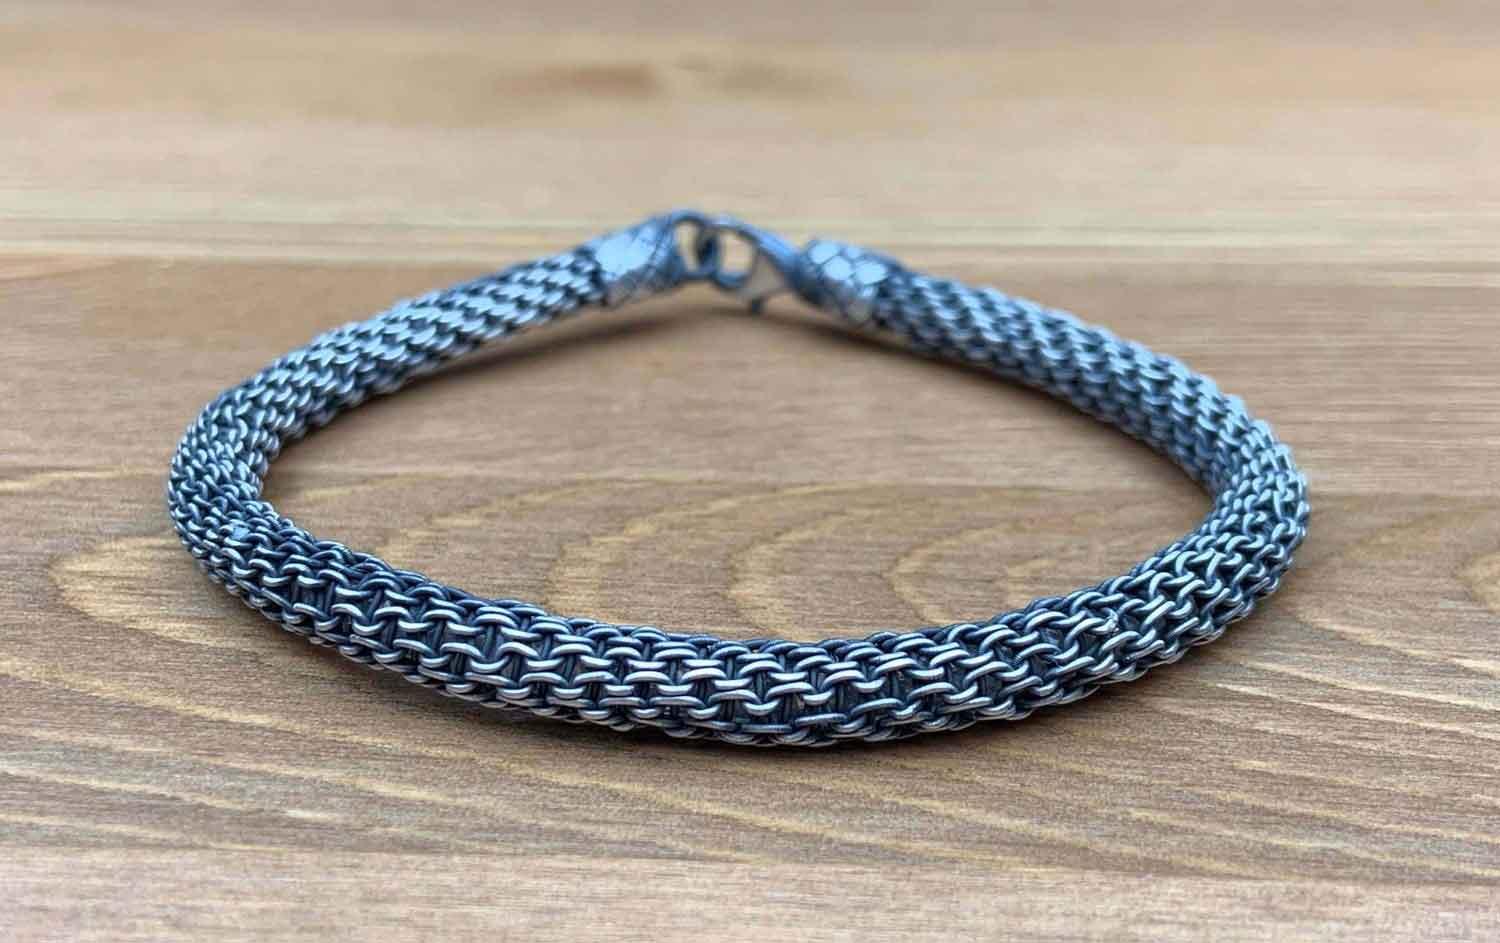 Exquisite GIFT For Grandpa, Weaved Bracelet, Weave Bracelet, Handmade Bracelet, Unisex Bracelet, Gift for Father, Sterling Silver Chain Bracelet available at Moyoni Design